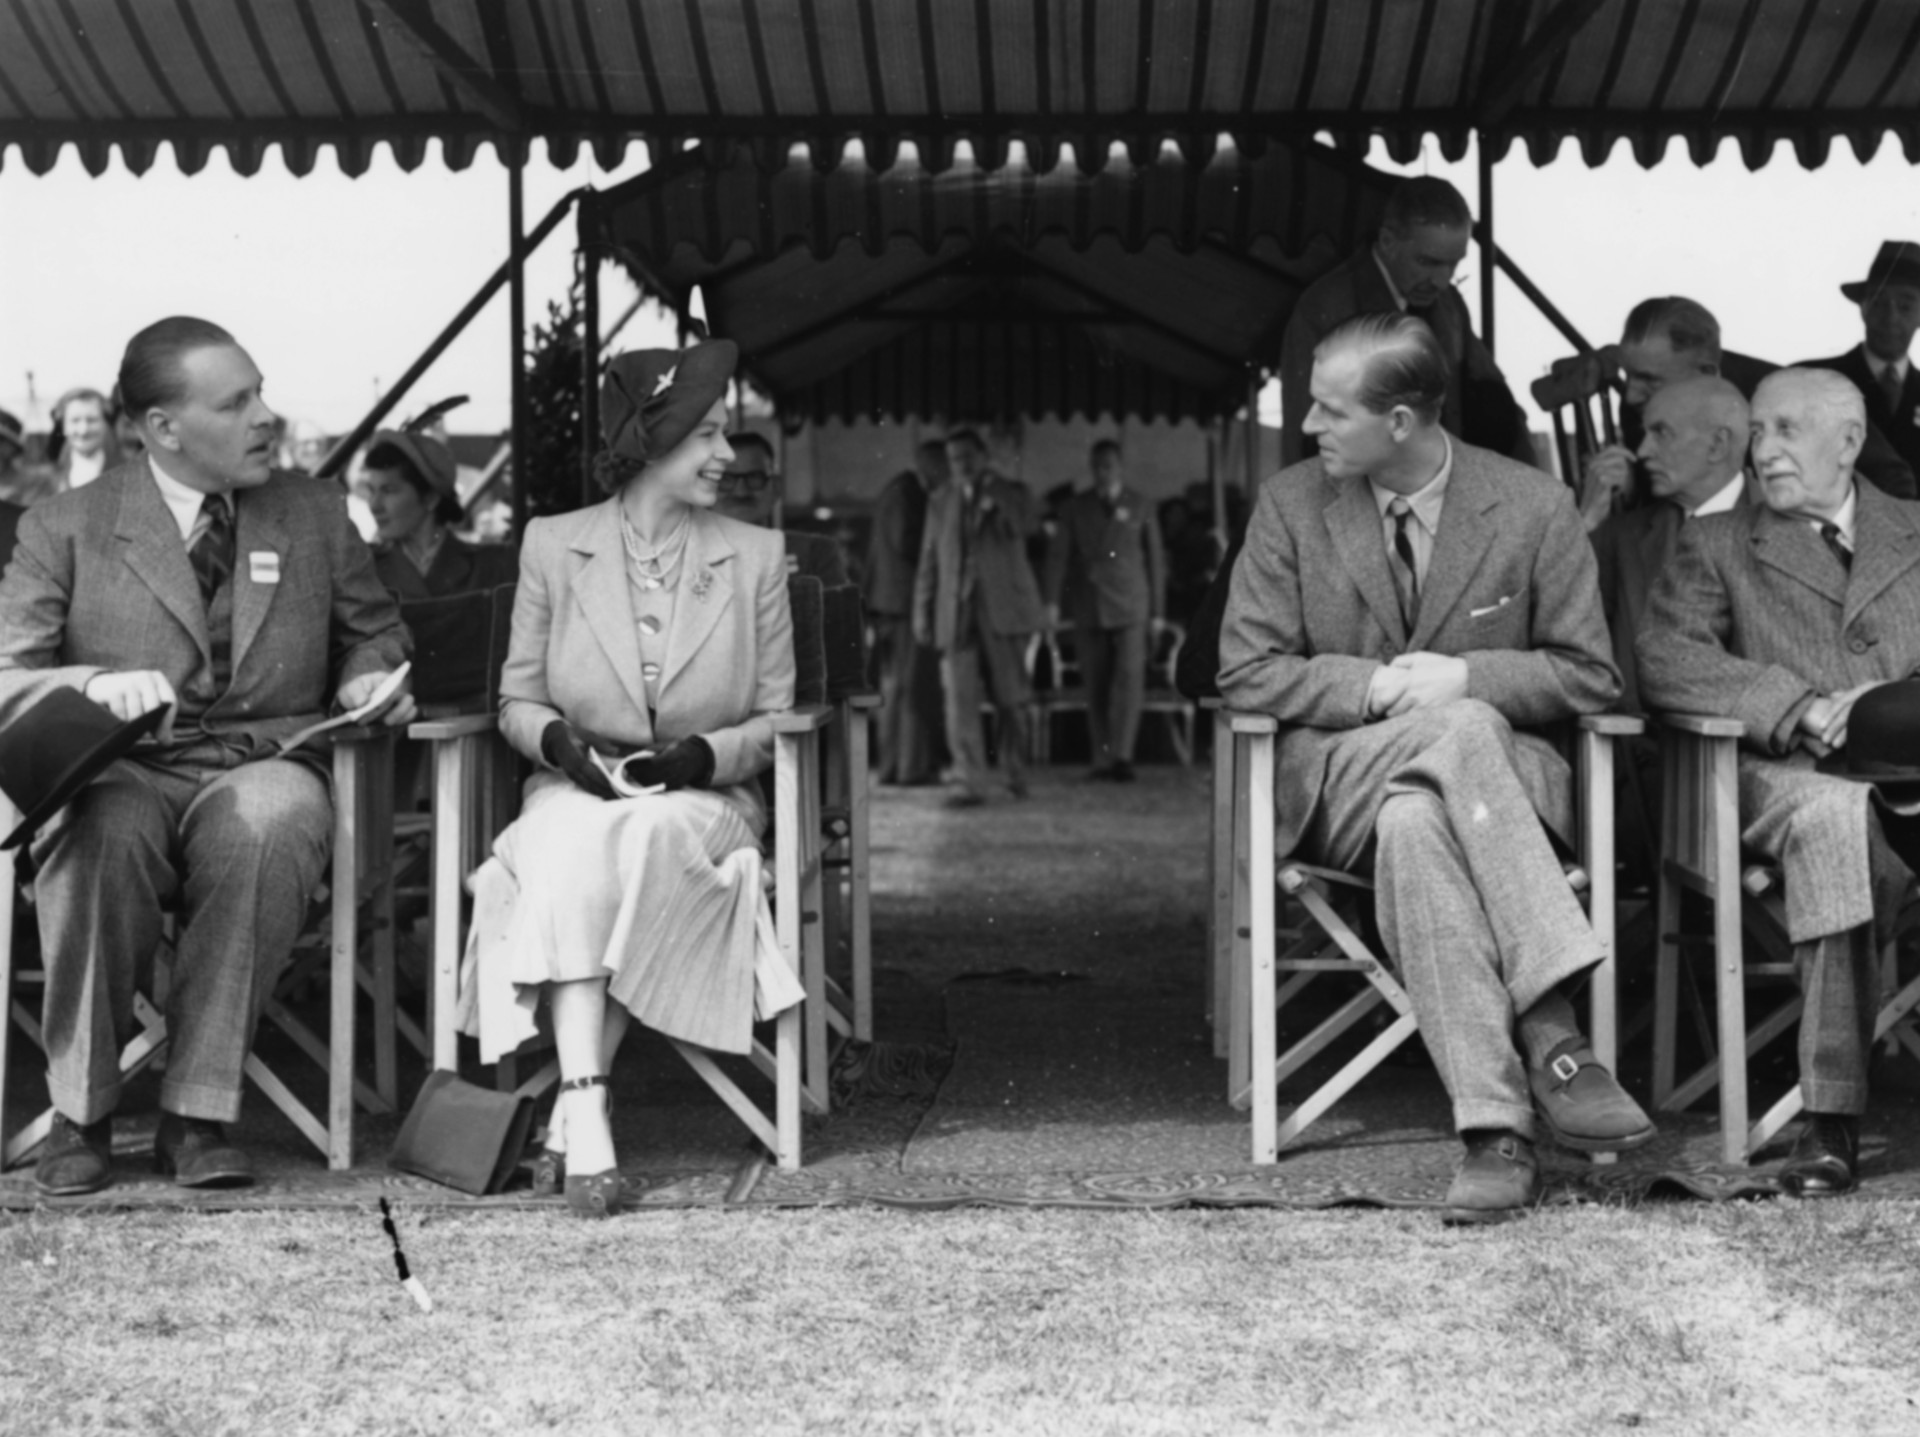 The royal couple smile across the aisle at the Royal Horse Show in 1949.<p><a href="https://www.msn.com/en-au/community/channel/vid-7xx8mnucu55yw63we9va2gwr7uihbxwc68fxqp25x6tg4ftibpra?cvid=94631541bc0f4f89bfd59158d696ad7e">Follow us and access great exclusive content every day</a></p>